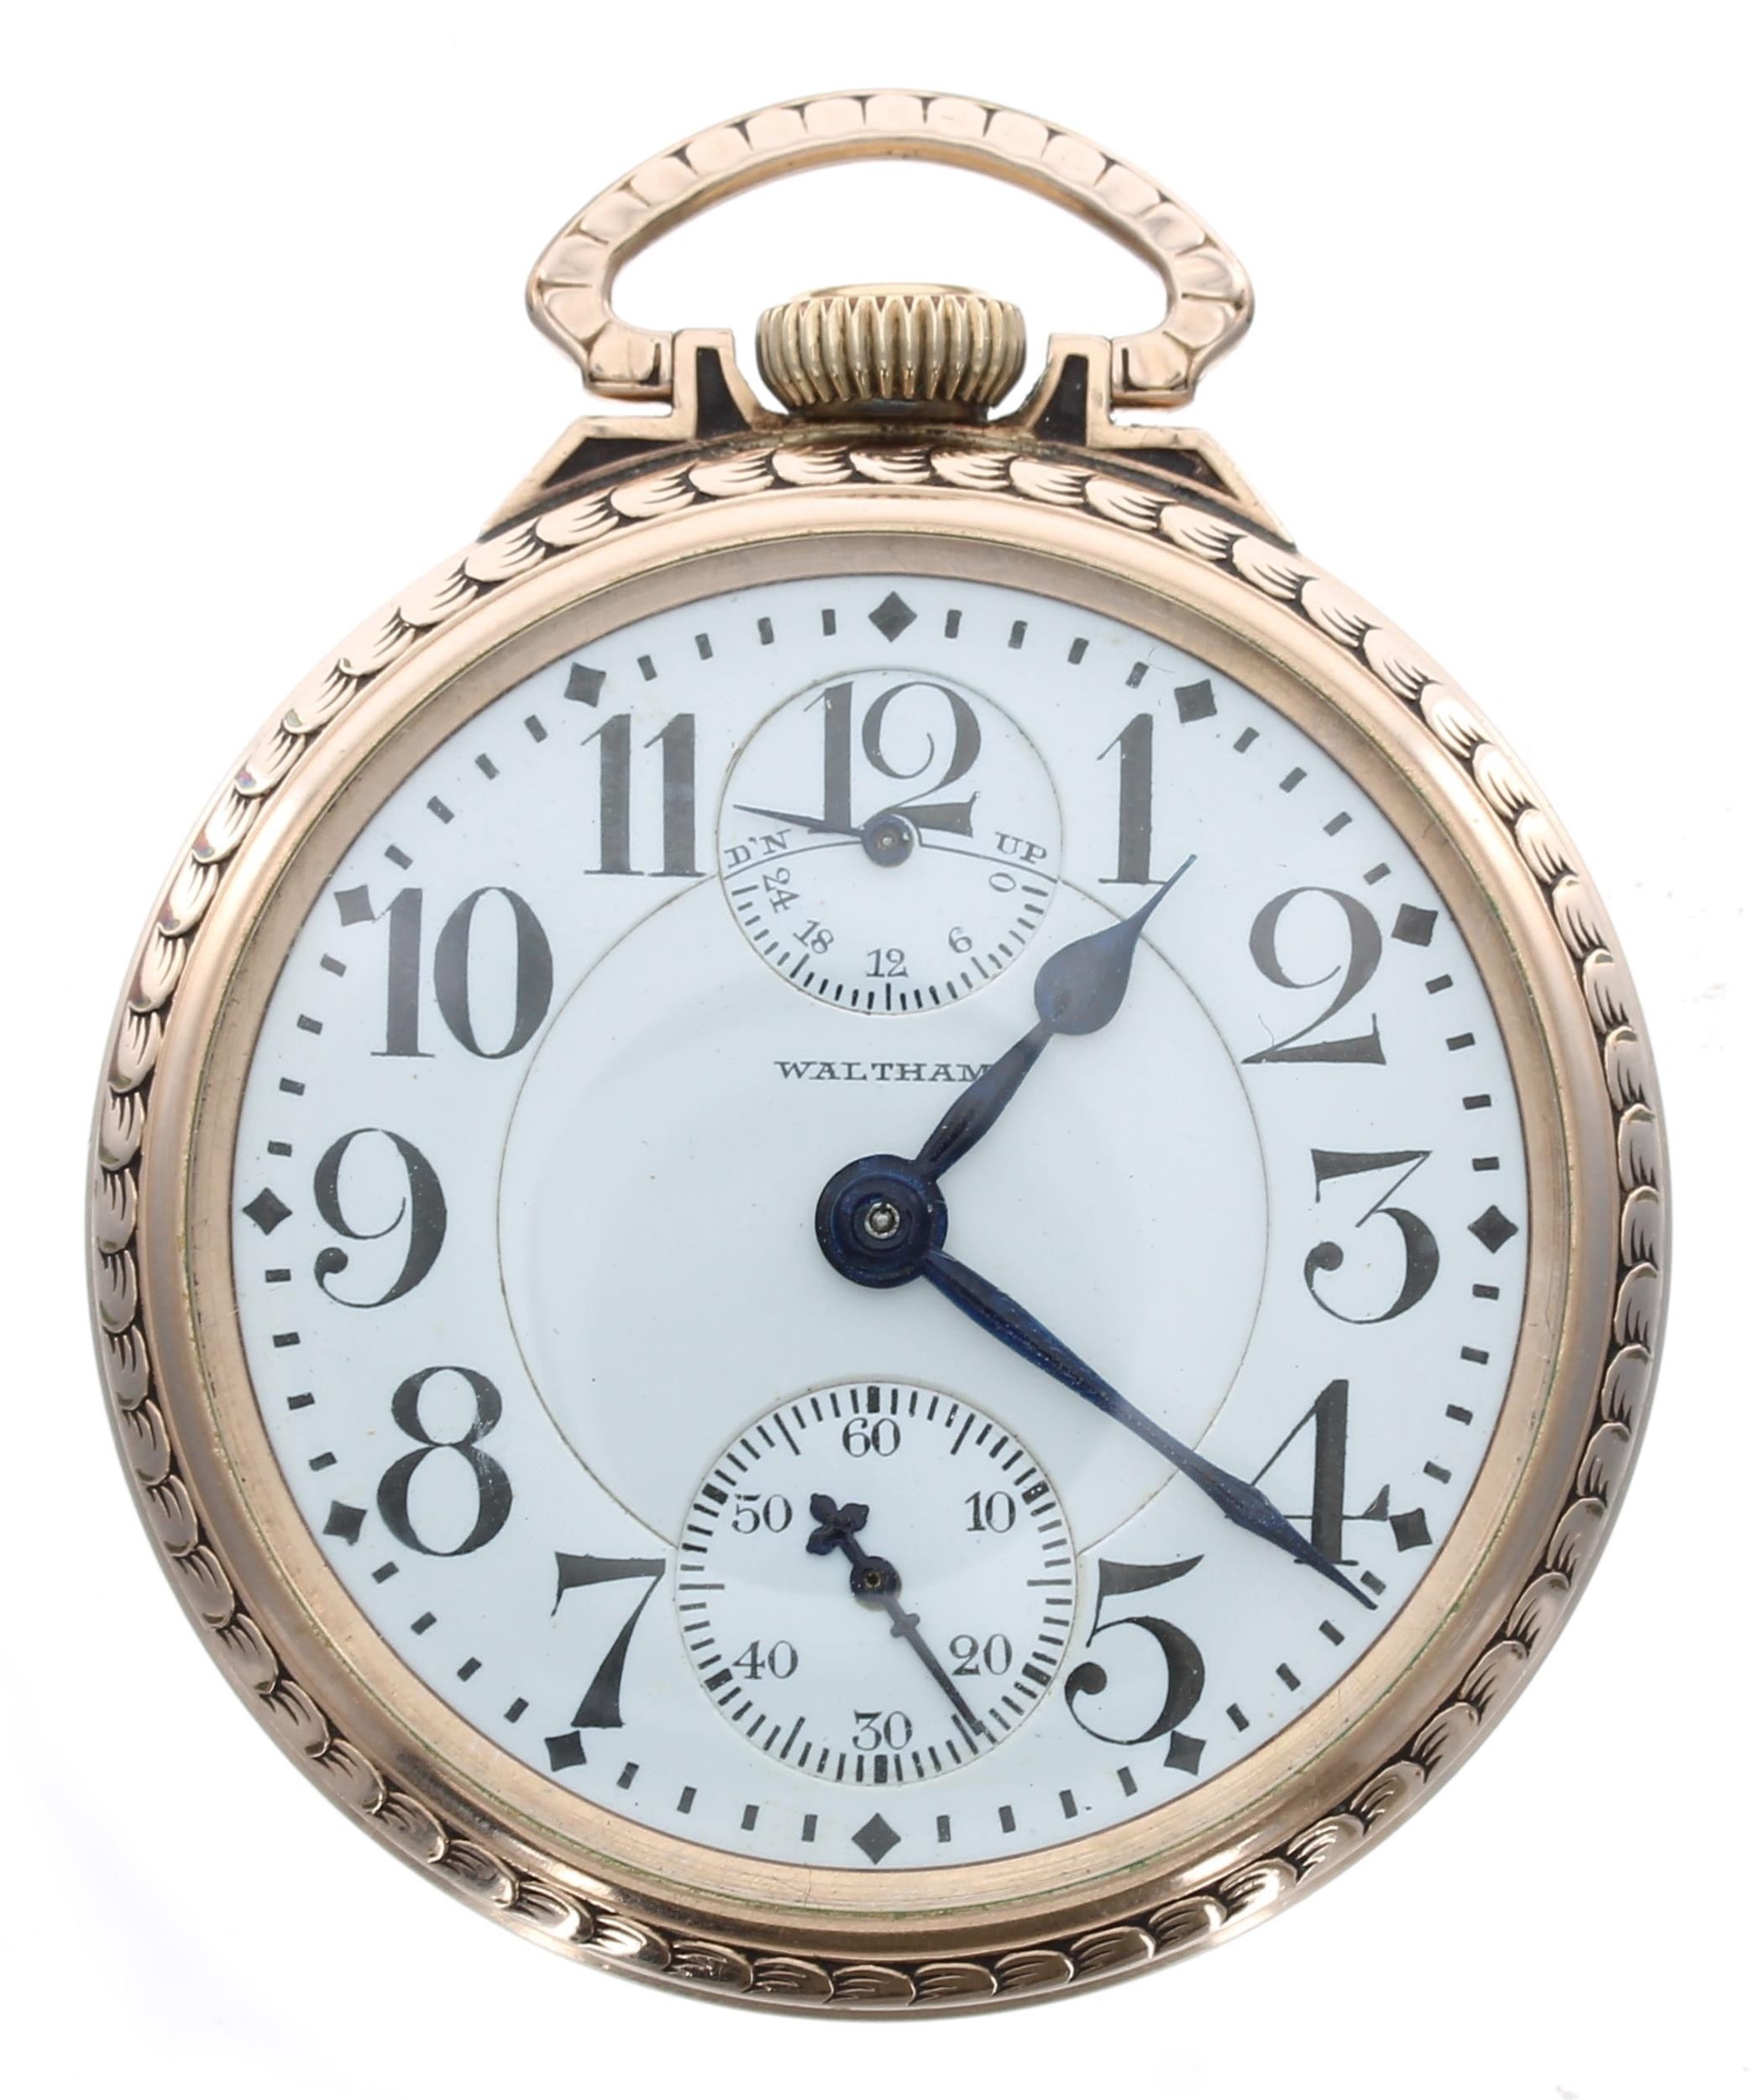 American Waltham 'Vanguard' 10k gold filled pocket watch with 'up/down' power reserve indicator, - Image 2 of 4